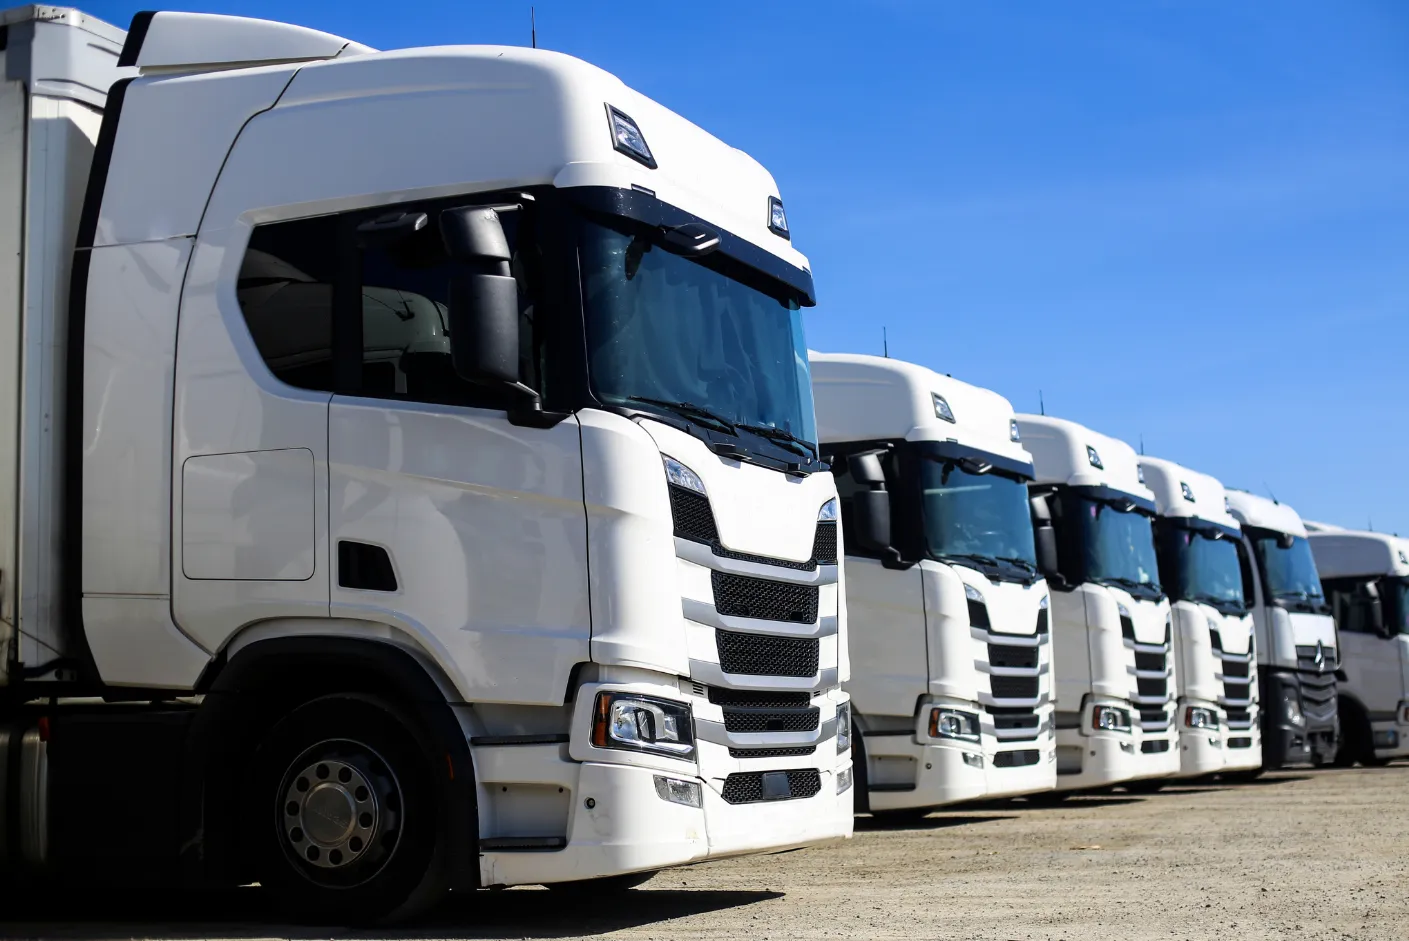 Here is the detailed information about the CDL permit test